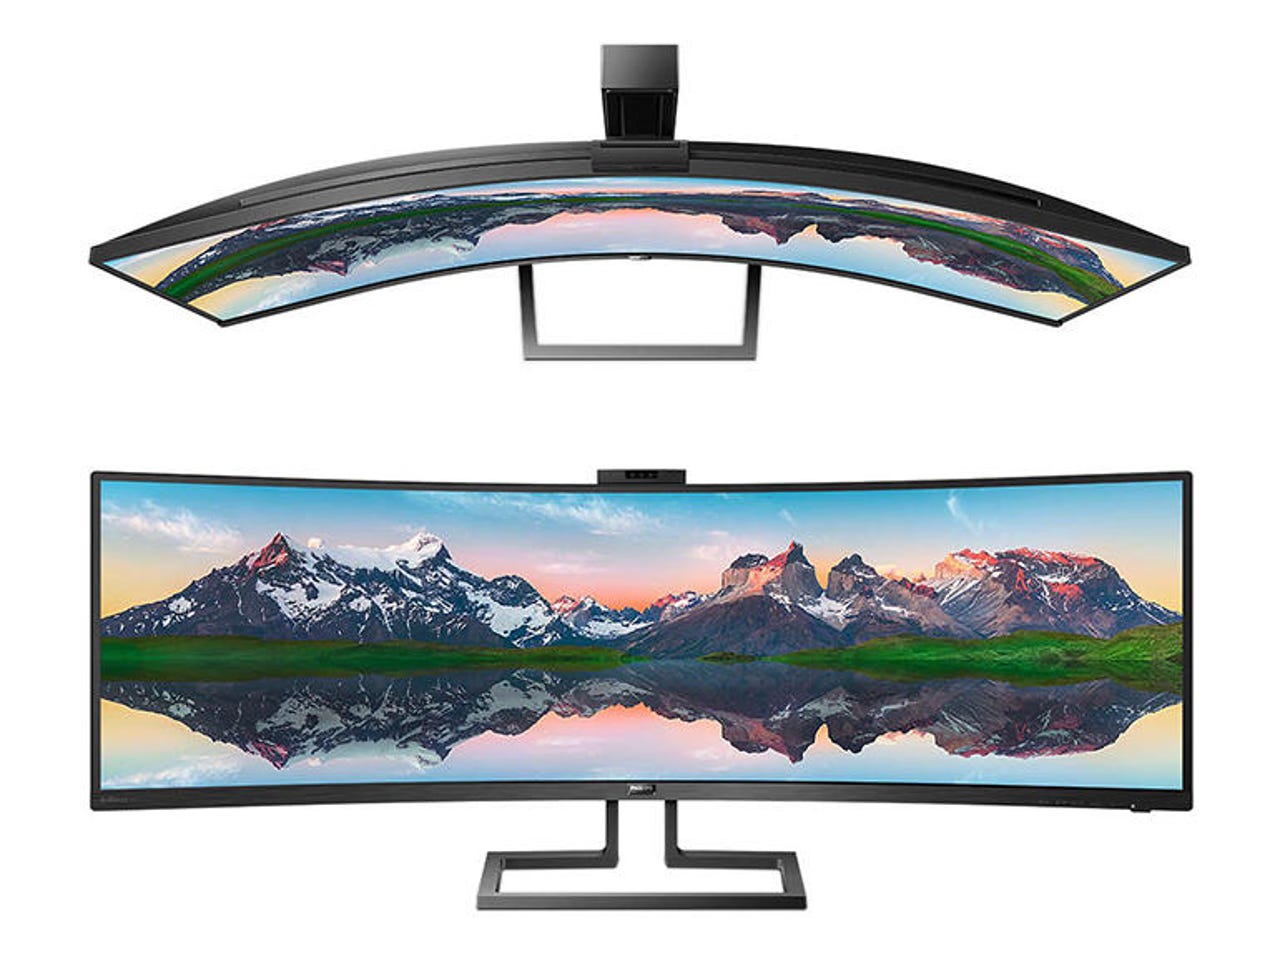 Philips SuperWide Curved LCD Display (499P9H)